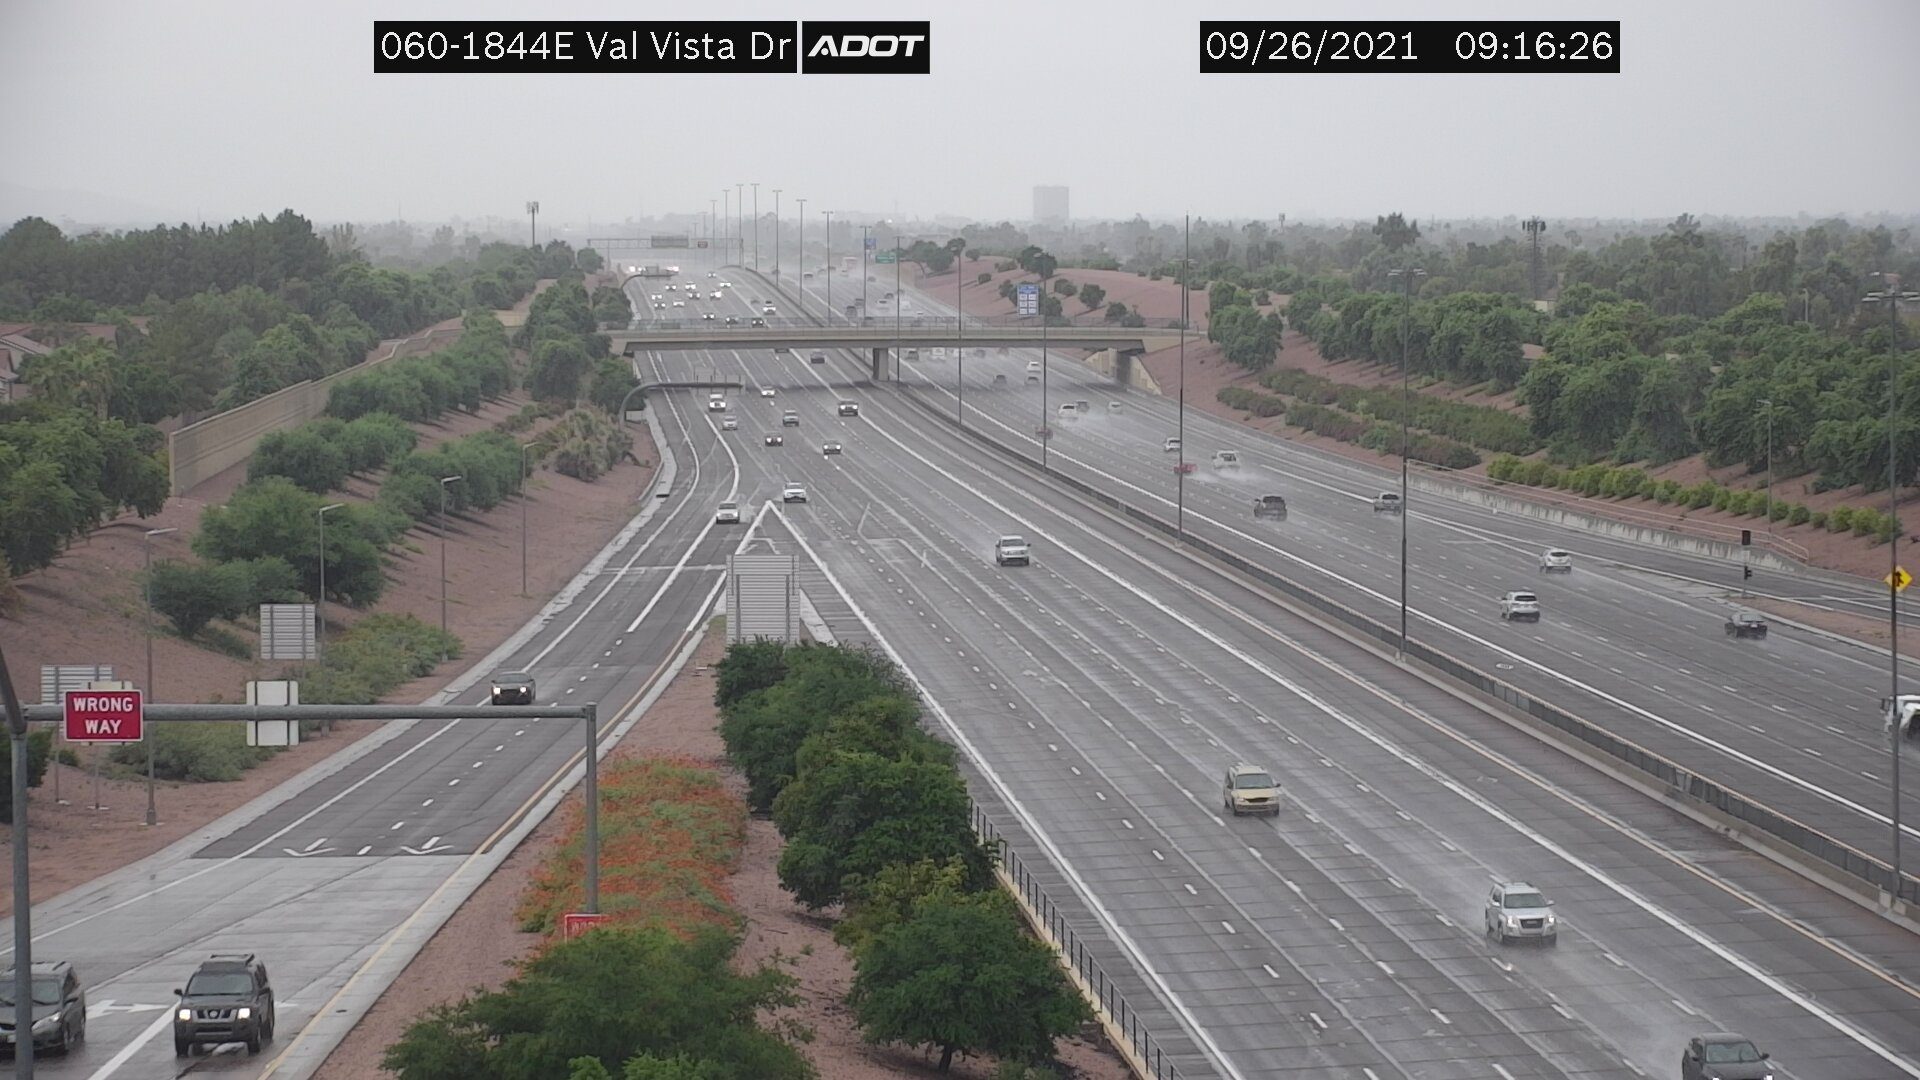 Rain hits the East Valley early Sunday, Sept. 26, near US 60 and Val Vista Drive. (ADOT freeway cam...